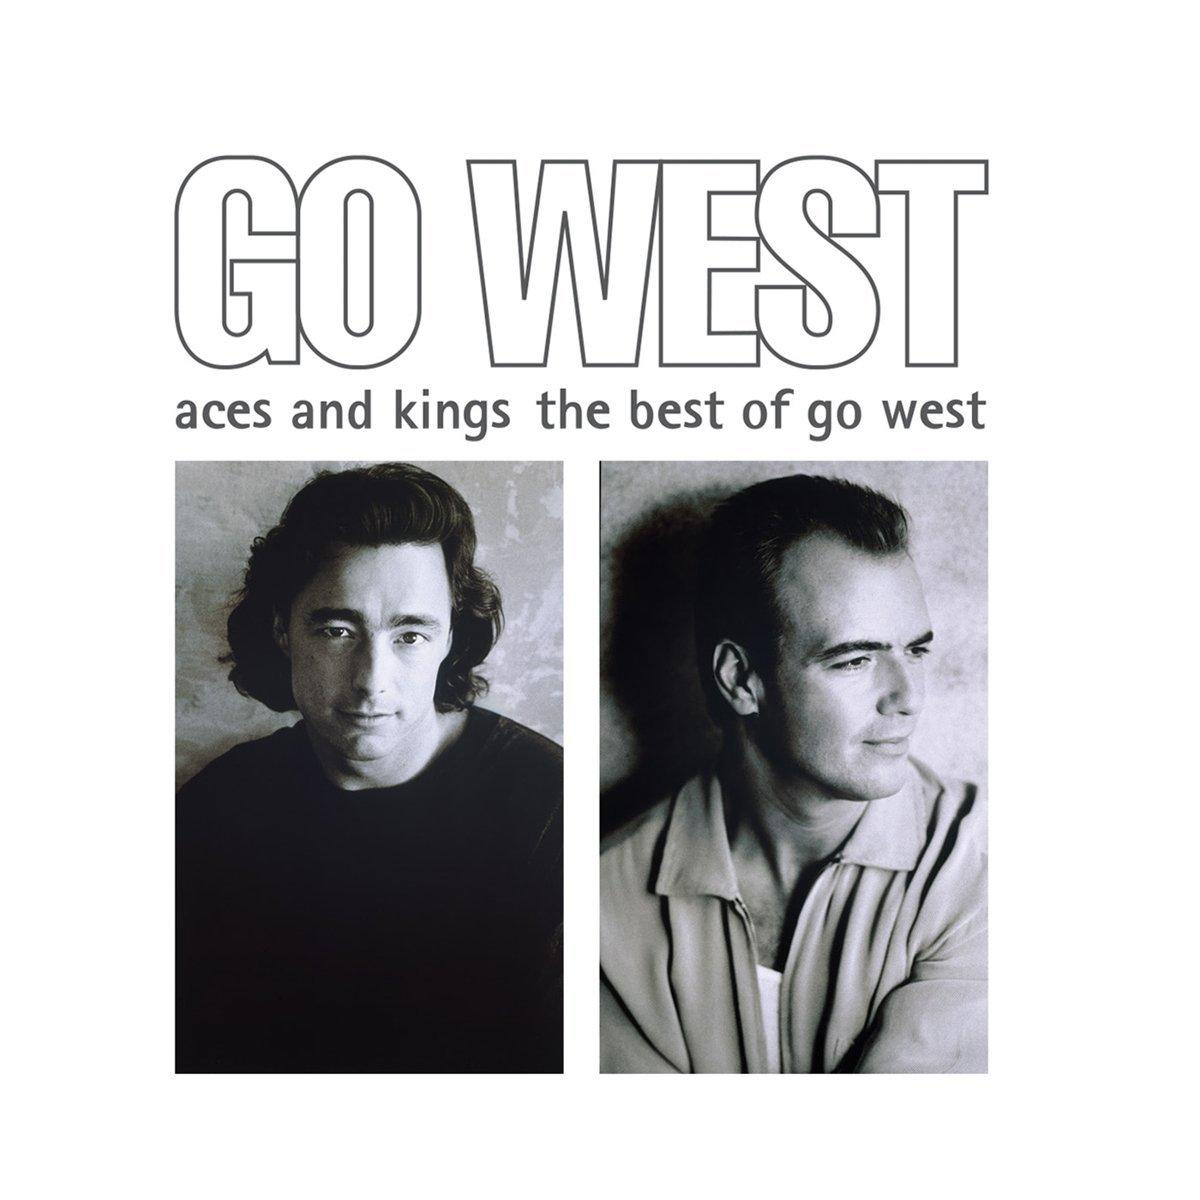 Go West - and Aces (CD) West of - Go Best Kings:The